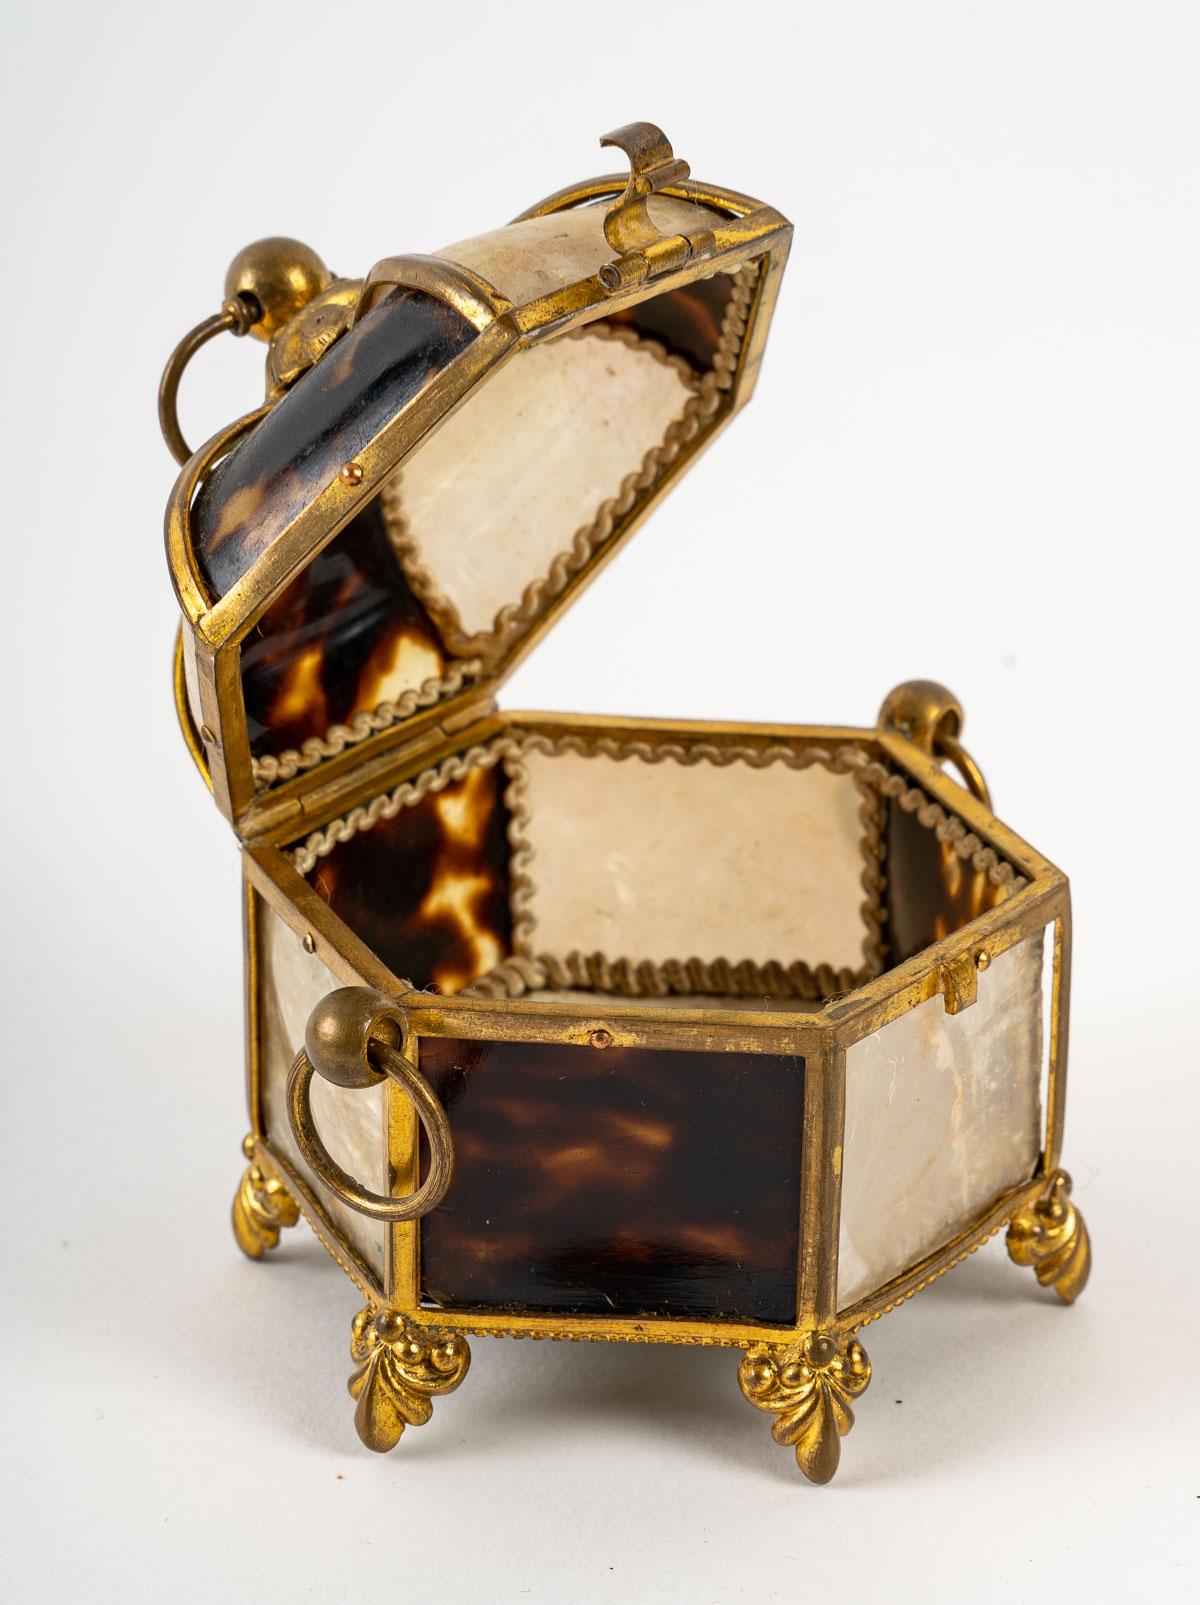 Small Charles X period box for precious jewels, early 19th century, made of tortoise shell, mother-of-pearl and gilt brass.
Measures: H: 8 cm, W: 9 cm, D: 7 cm.